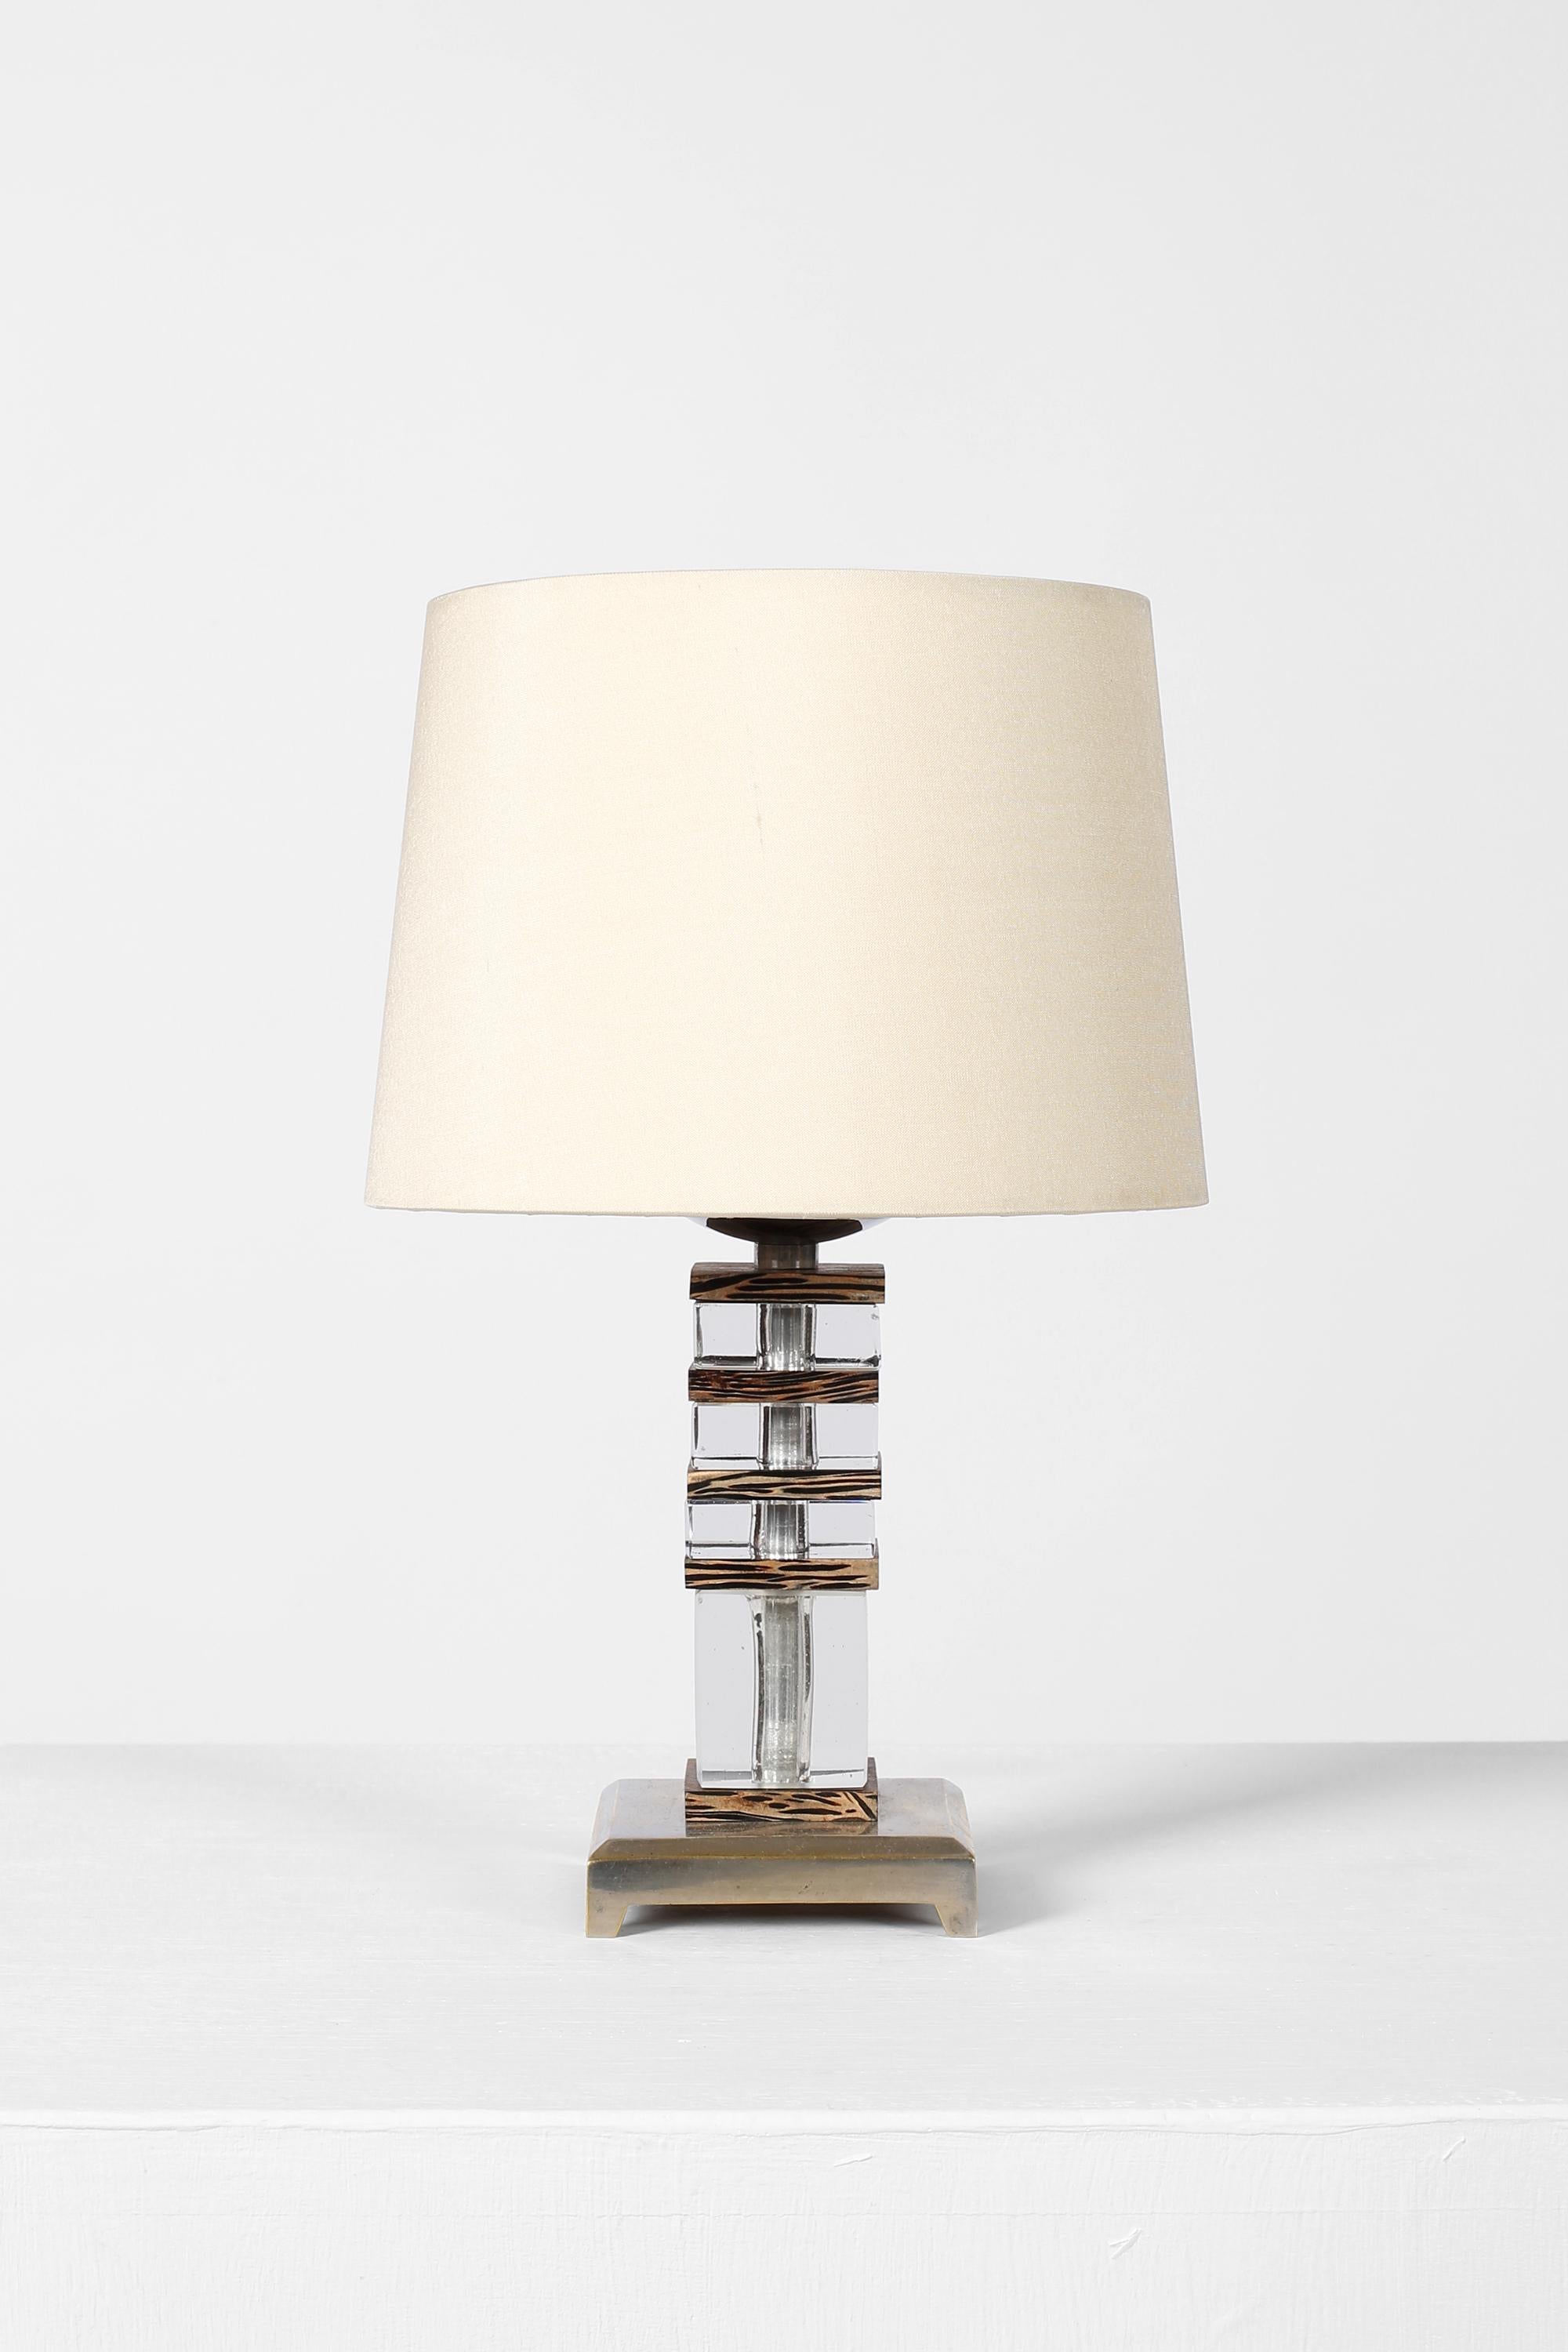 A chic and diminutive Art Deco table lamp in stacked cut glass and palm wood, with a nickel plated bronze base. French, c. 1930s. Supplied with a bespoke ivory dupion silk shade.